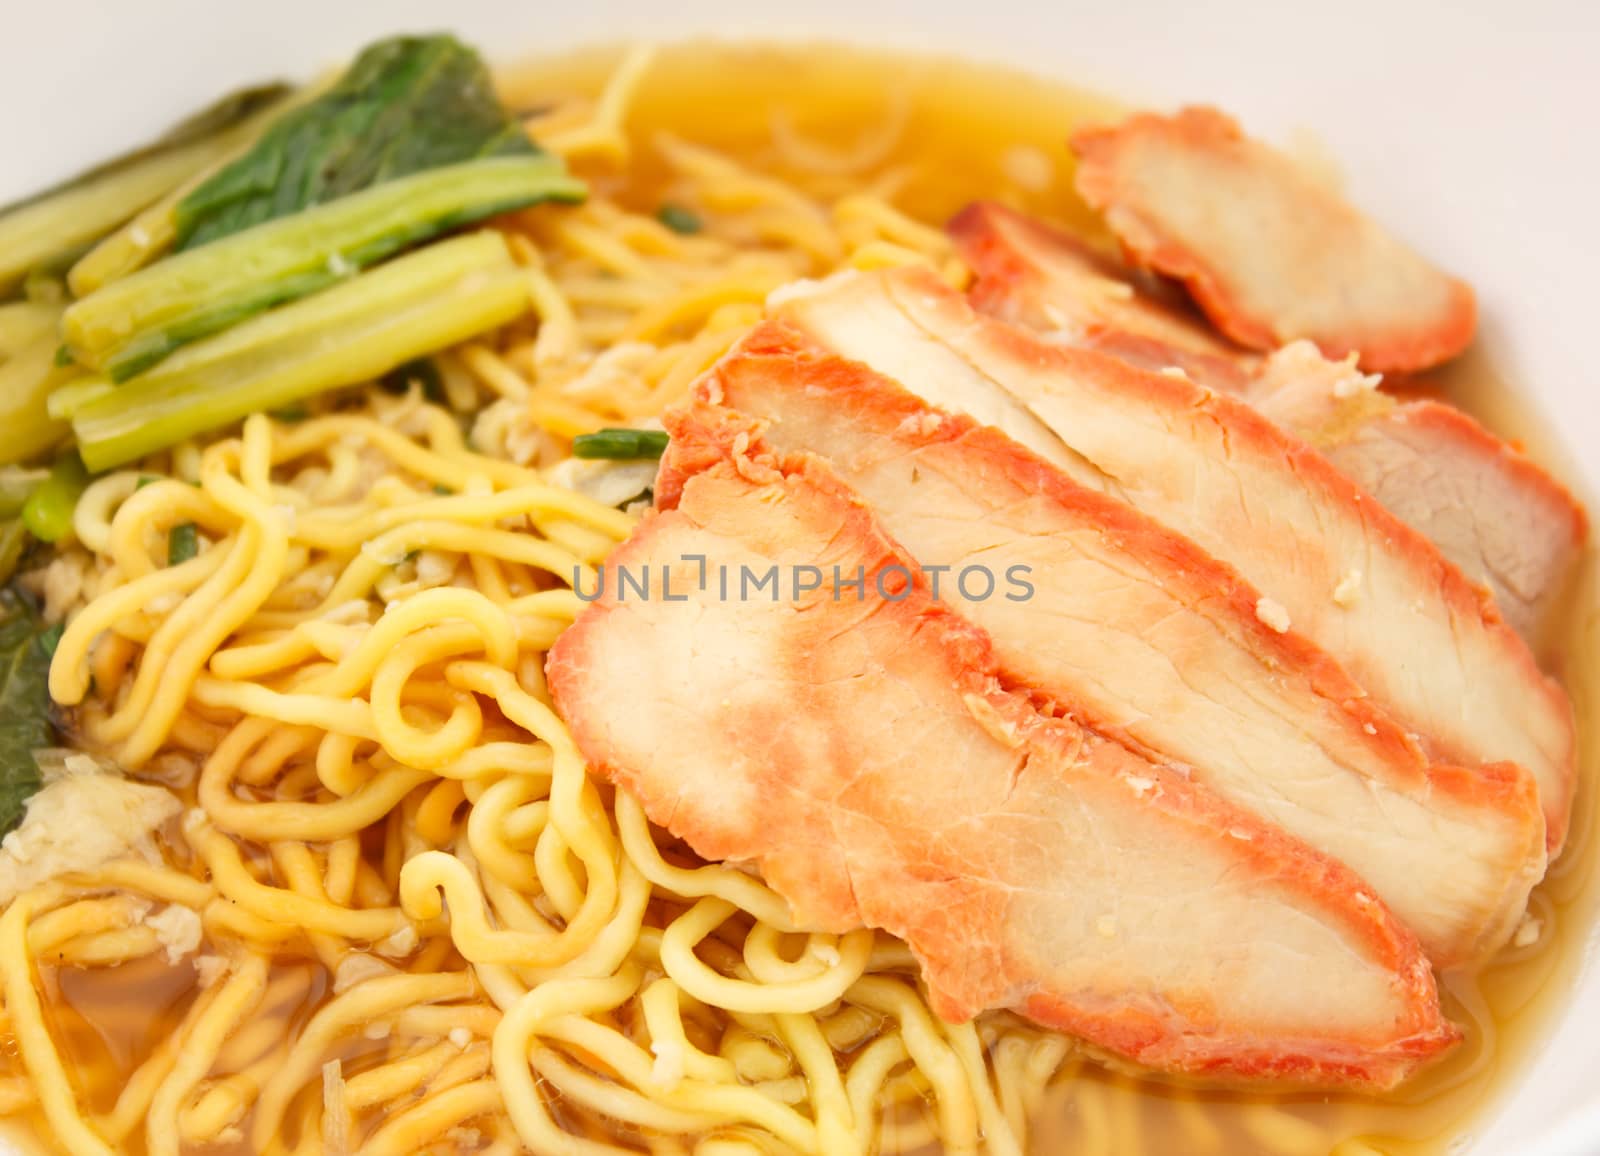 Chinese egg noodles with red pork in hot soup